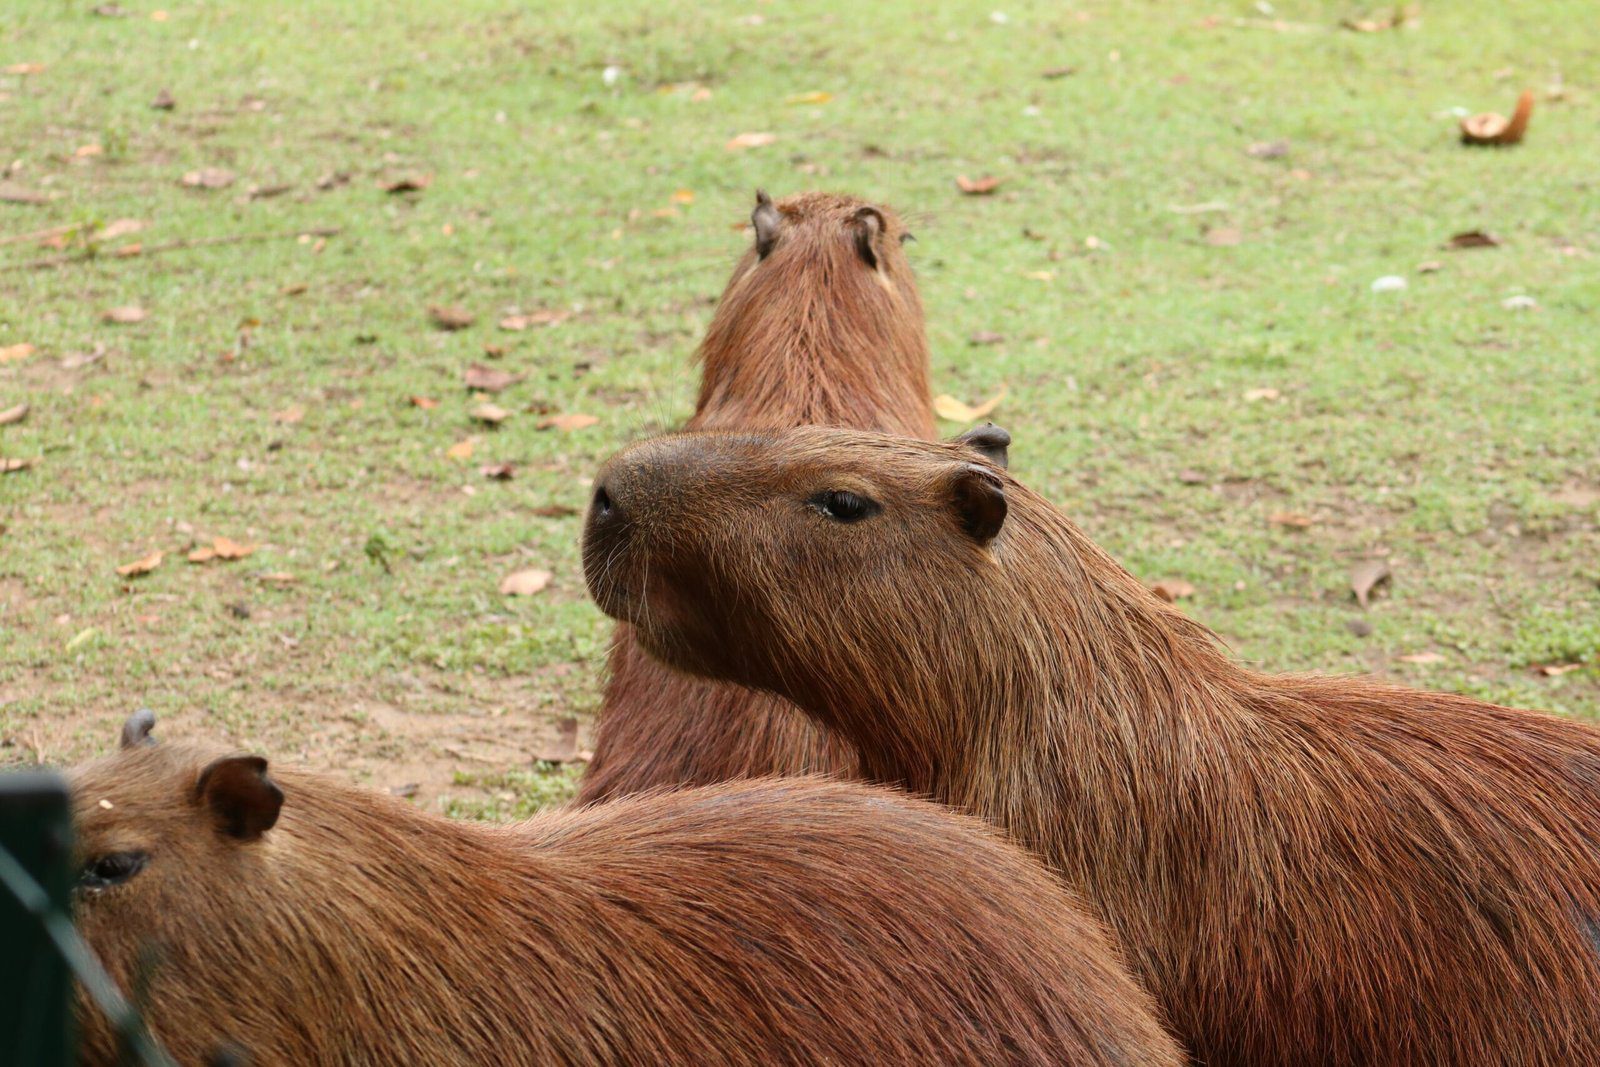 Get Your Own Real Capybara Today!